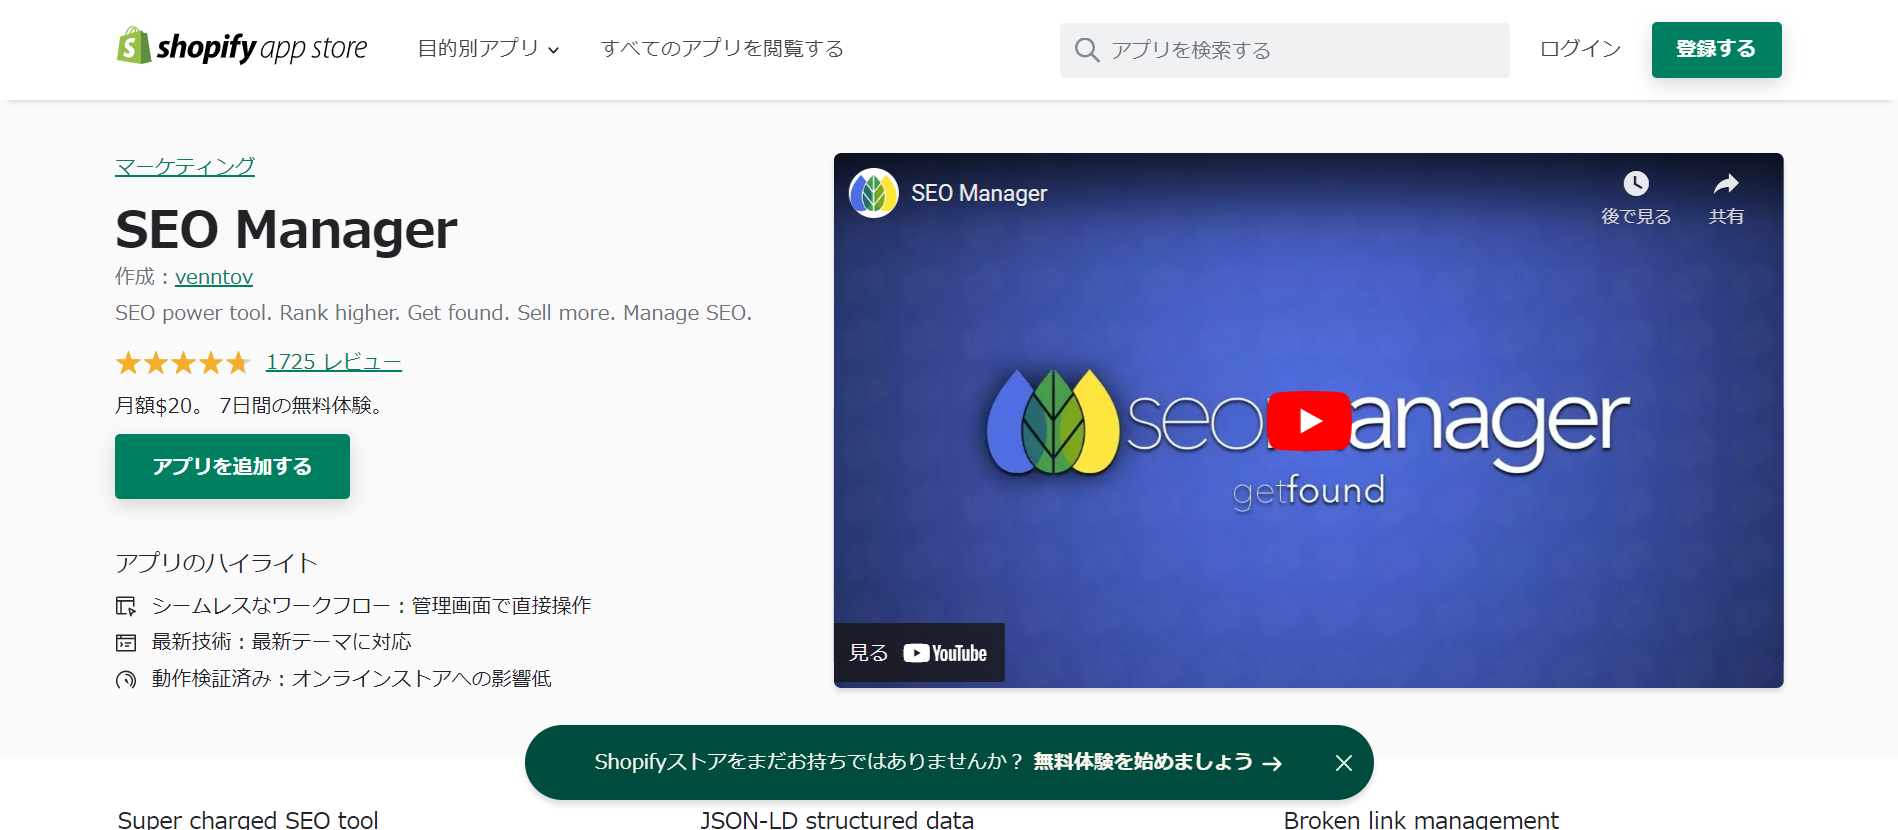 SEO-Manager